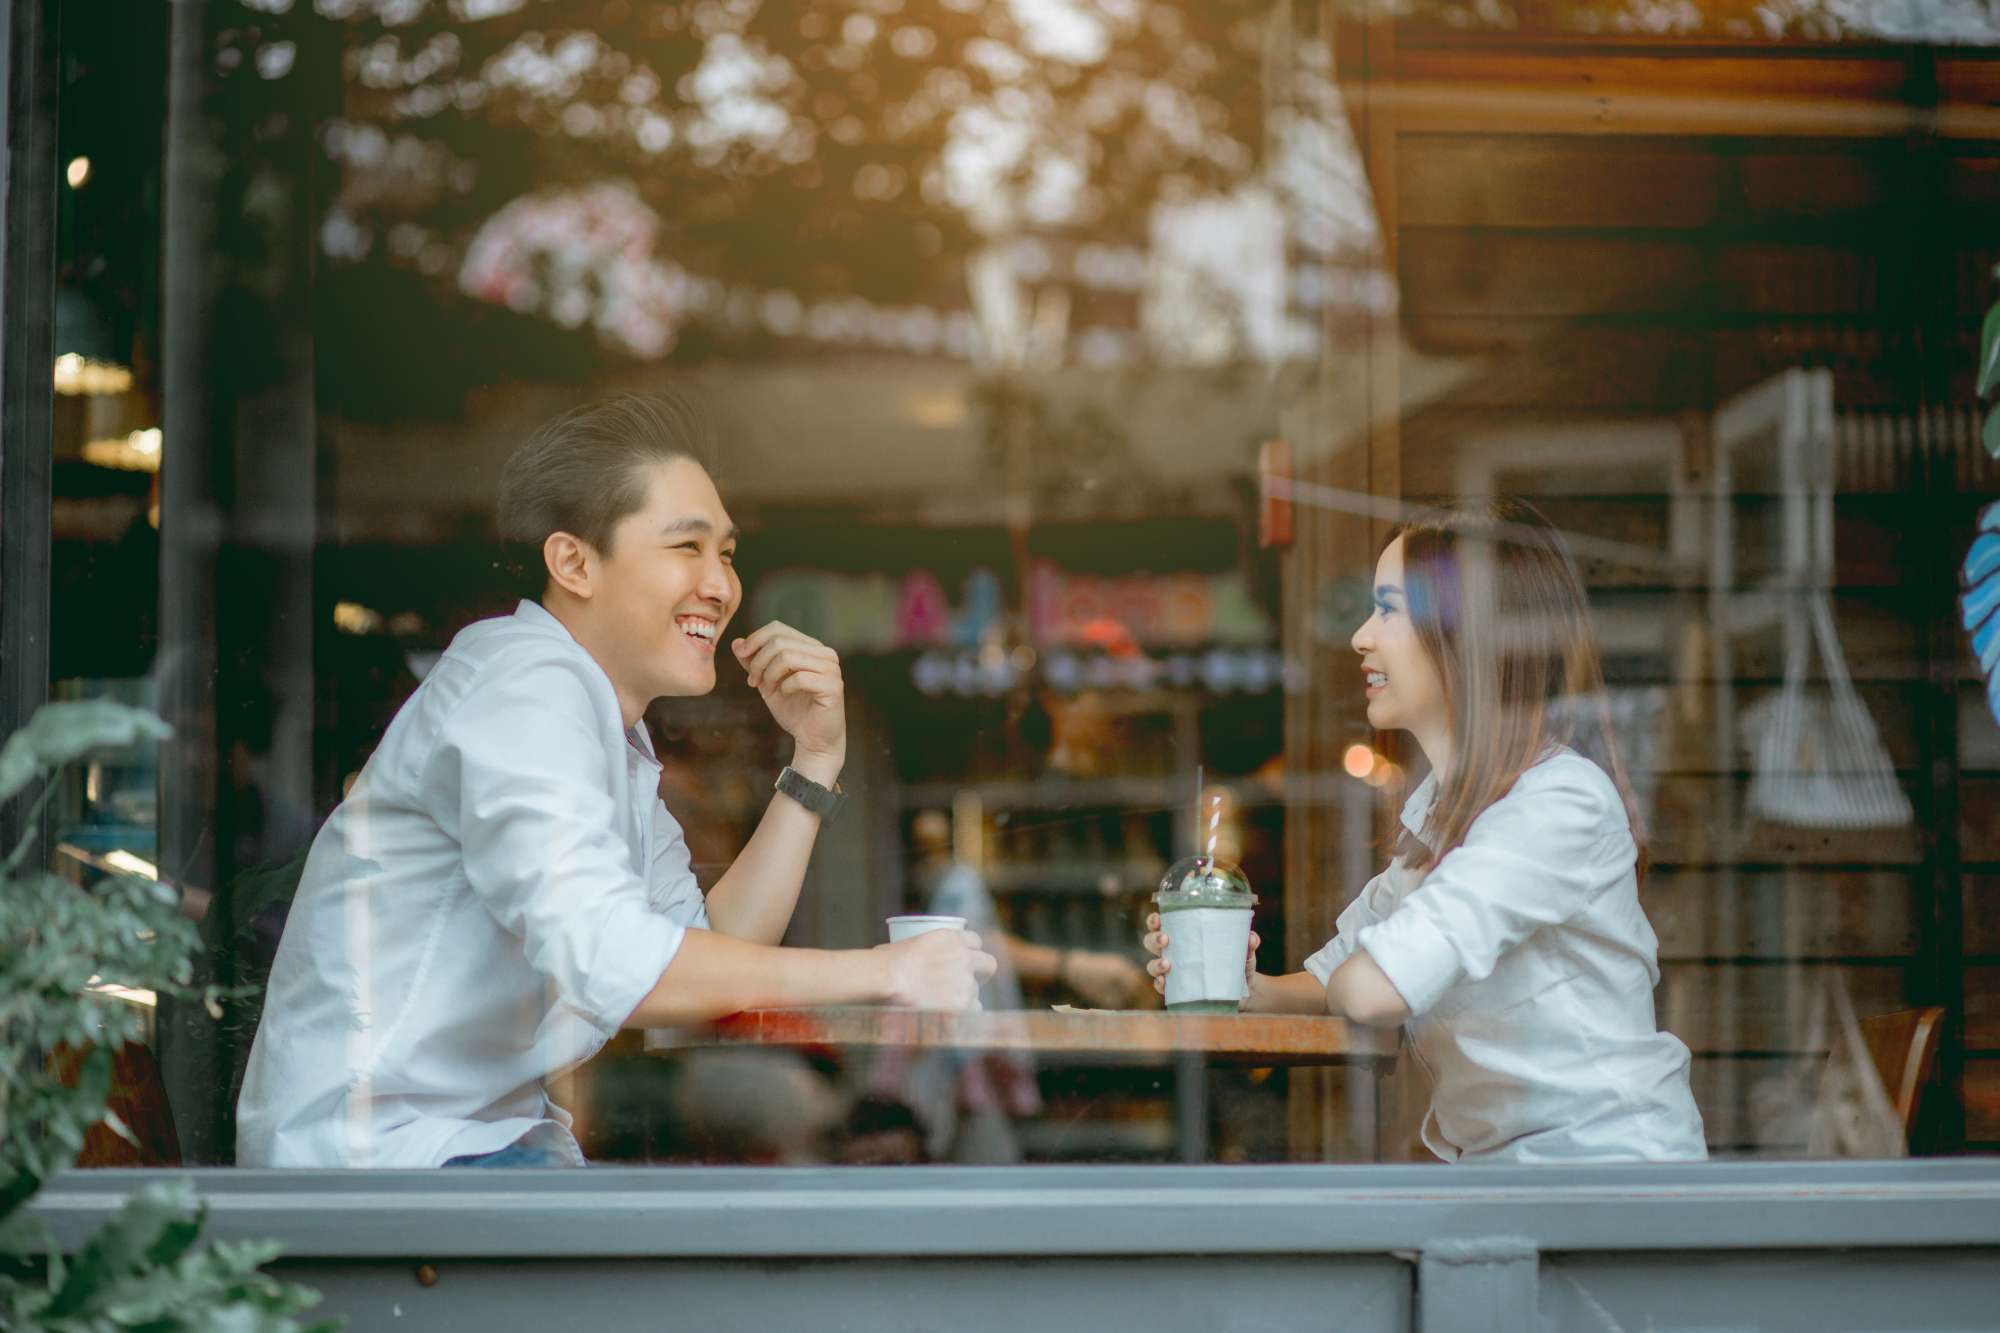 man and woman on a date together having a laugh over coffee